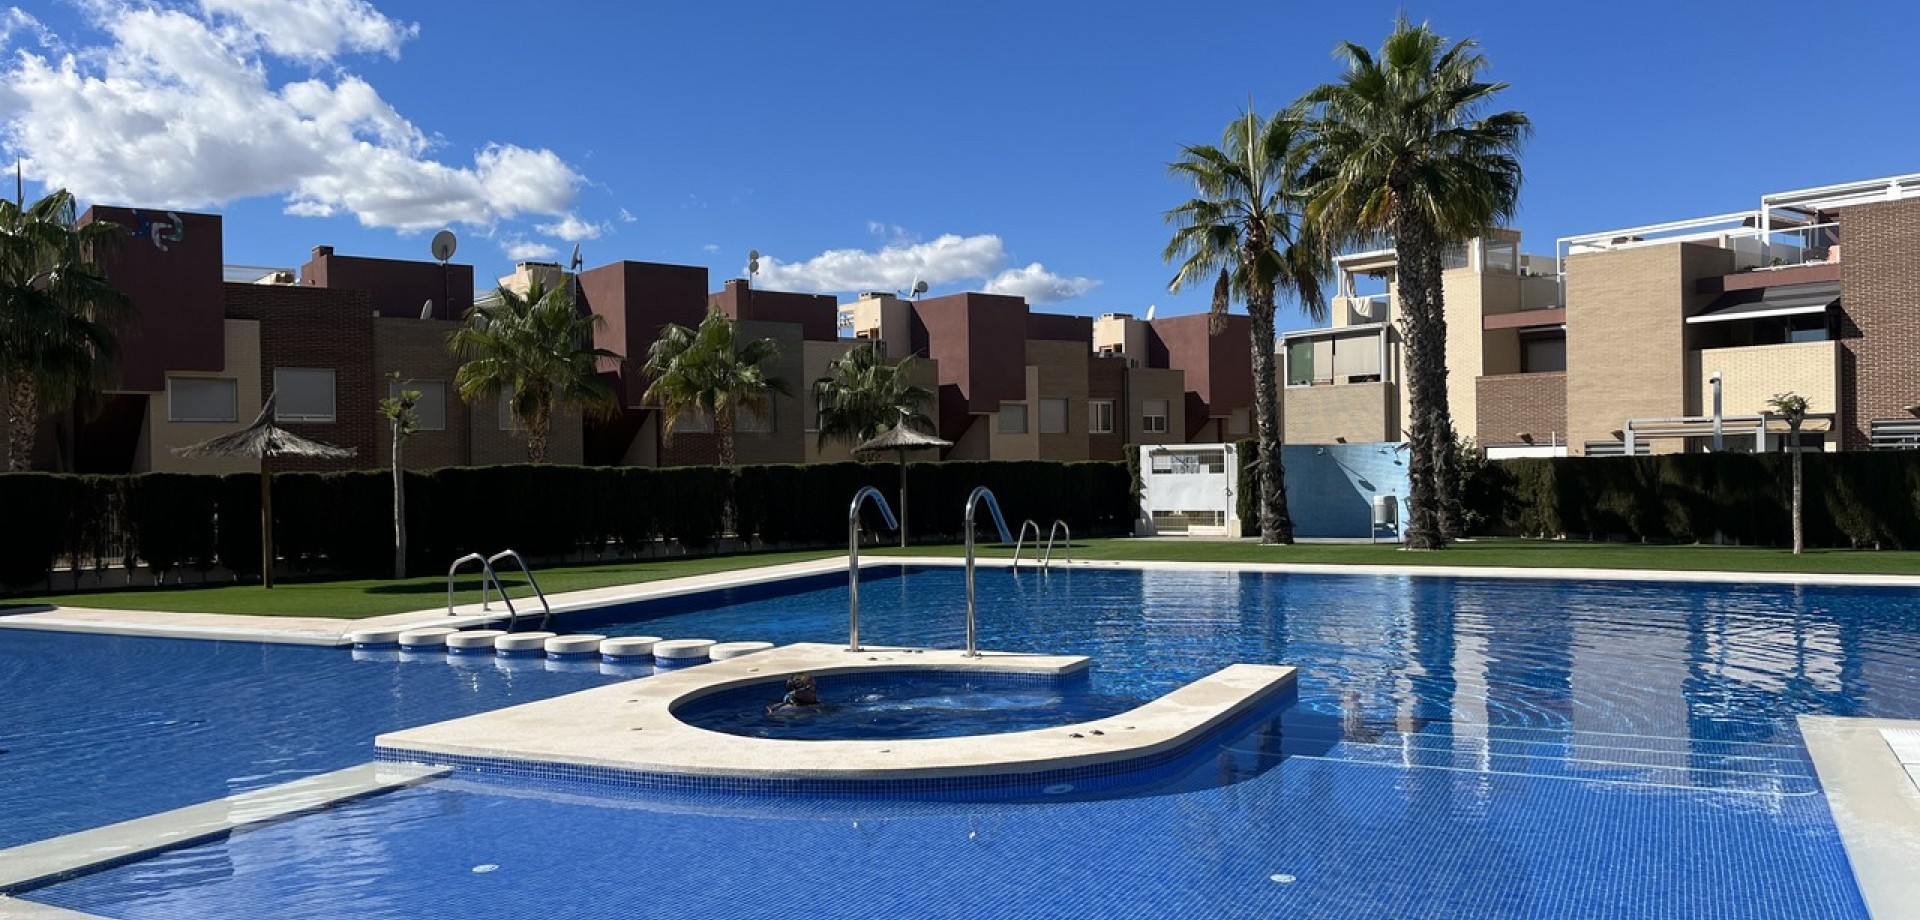 Property Image 613909-torrevieja-apartment-2-2